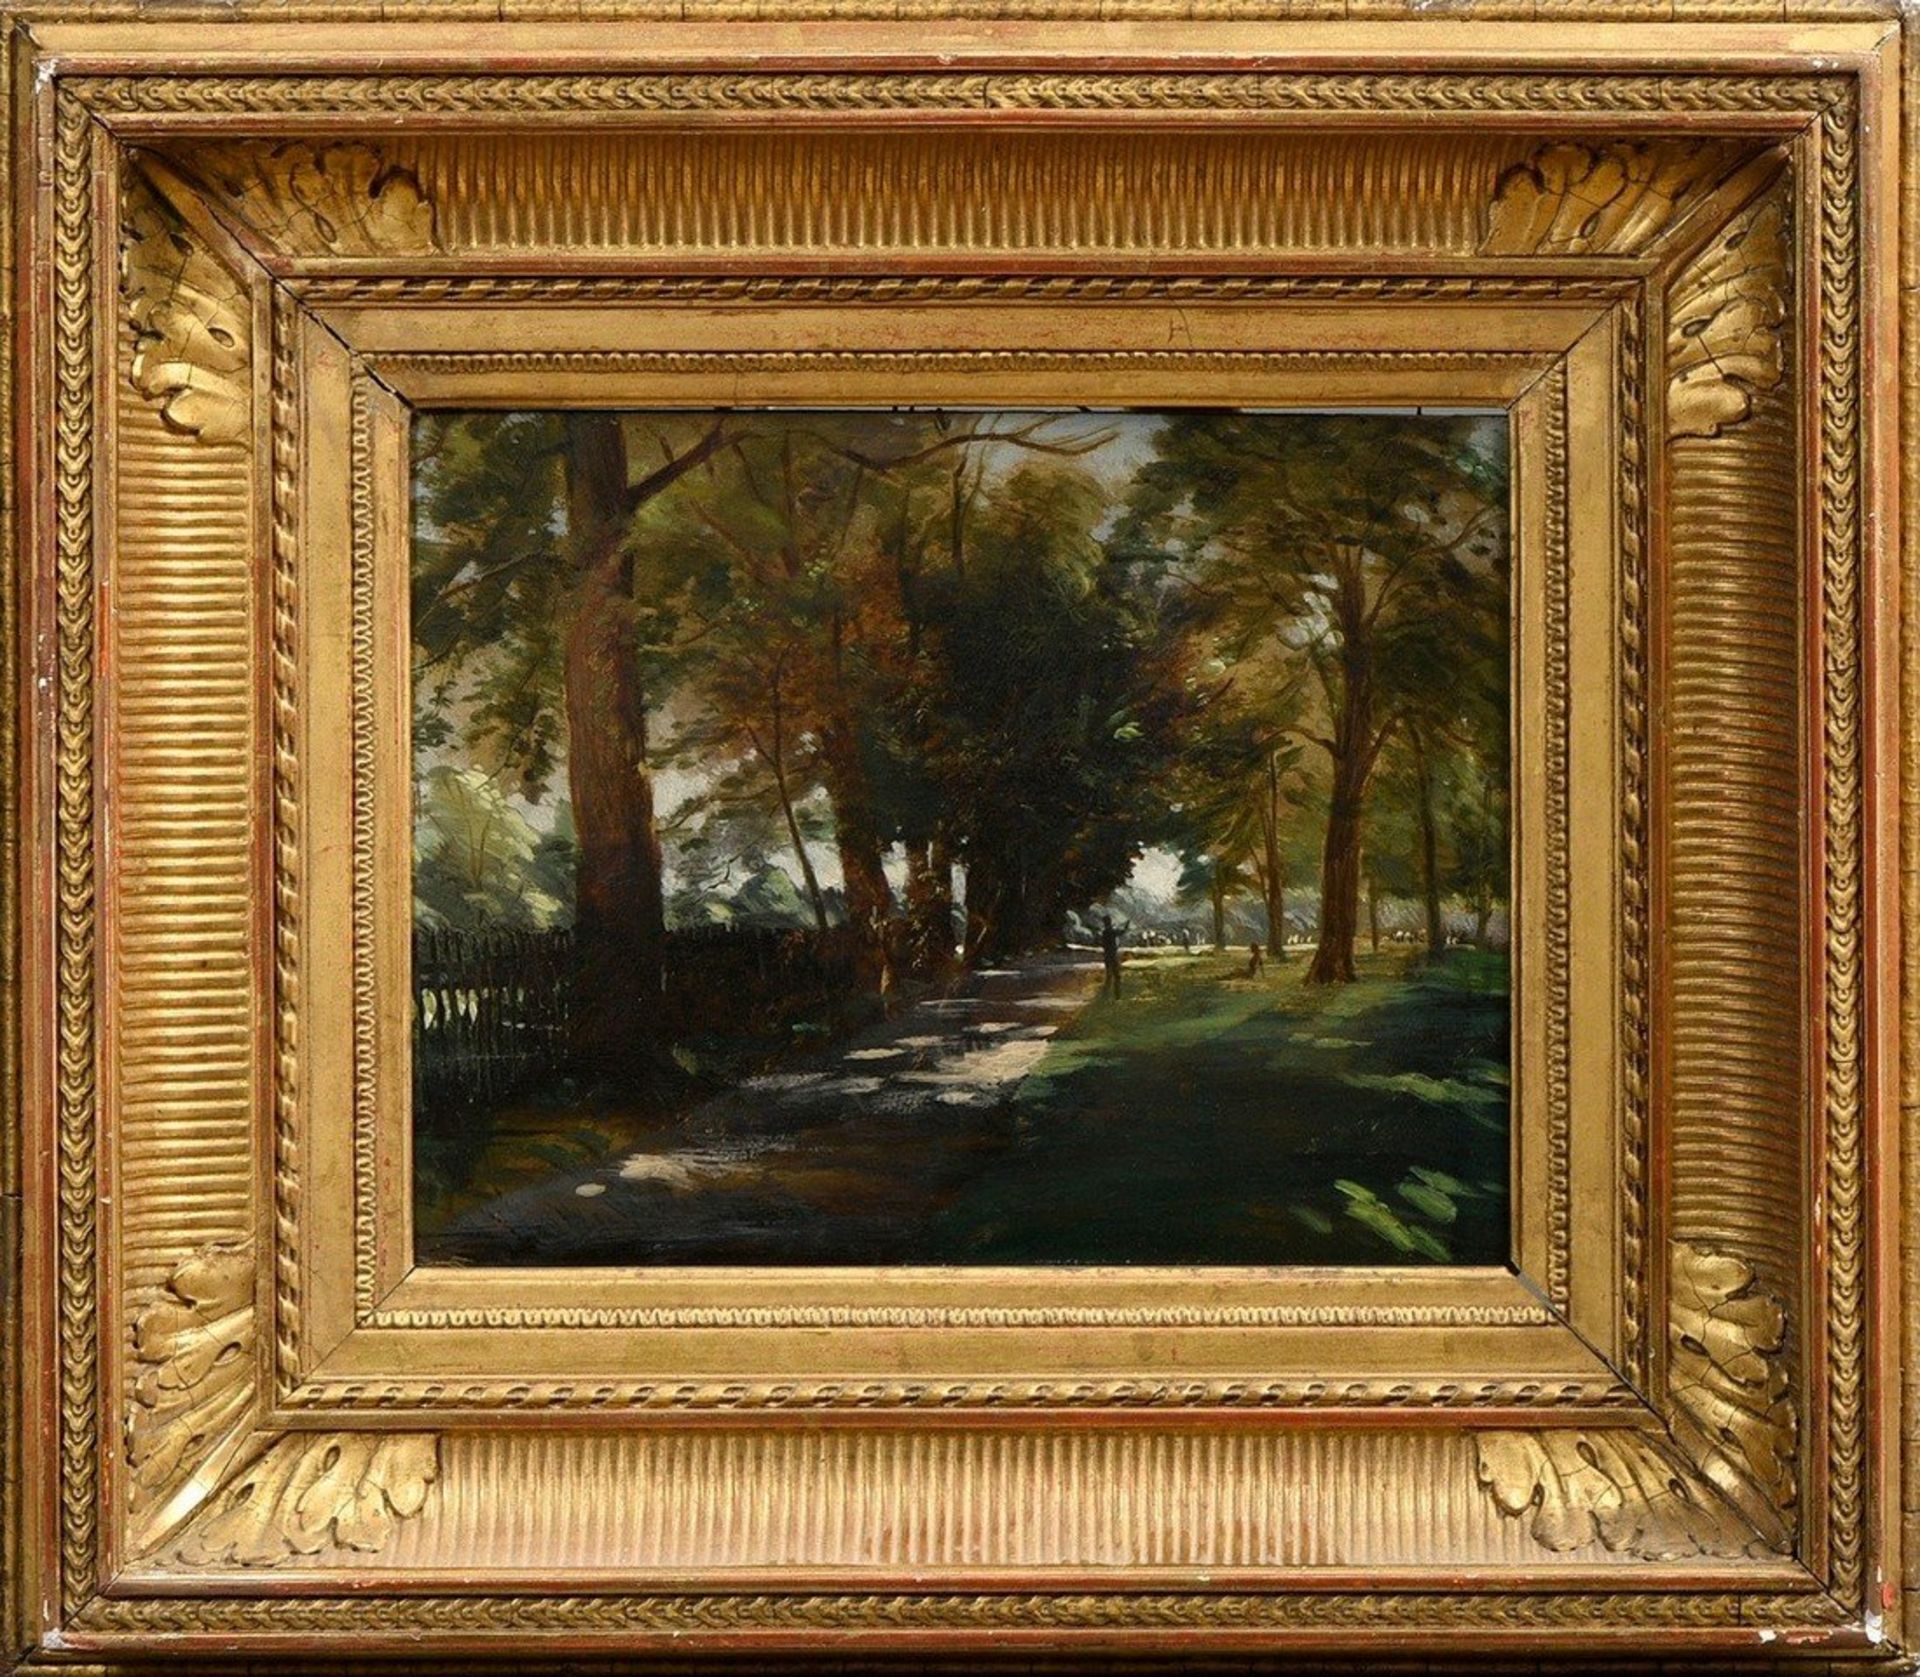 Cazin, Jean-Charles (1841-1901) attributed "In the Park", oil/wood, b.r. monogr., magnificent frame - Image 2 of 6